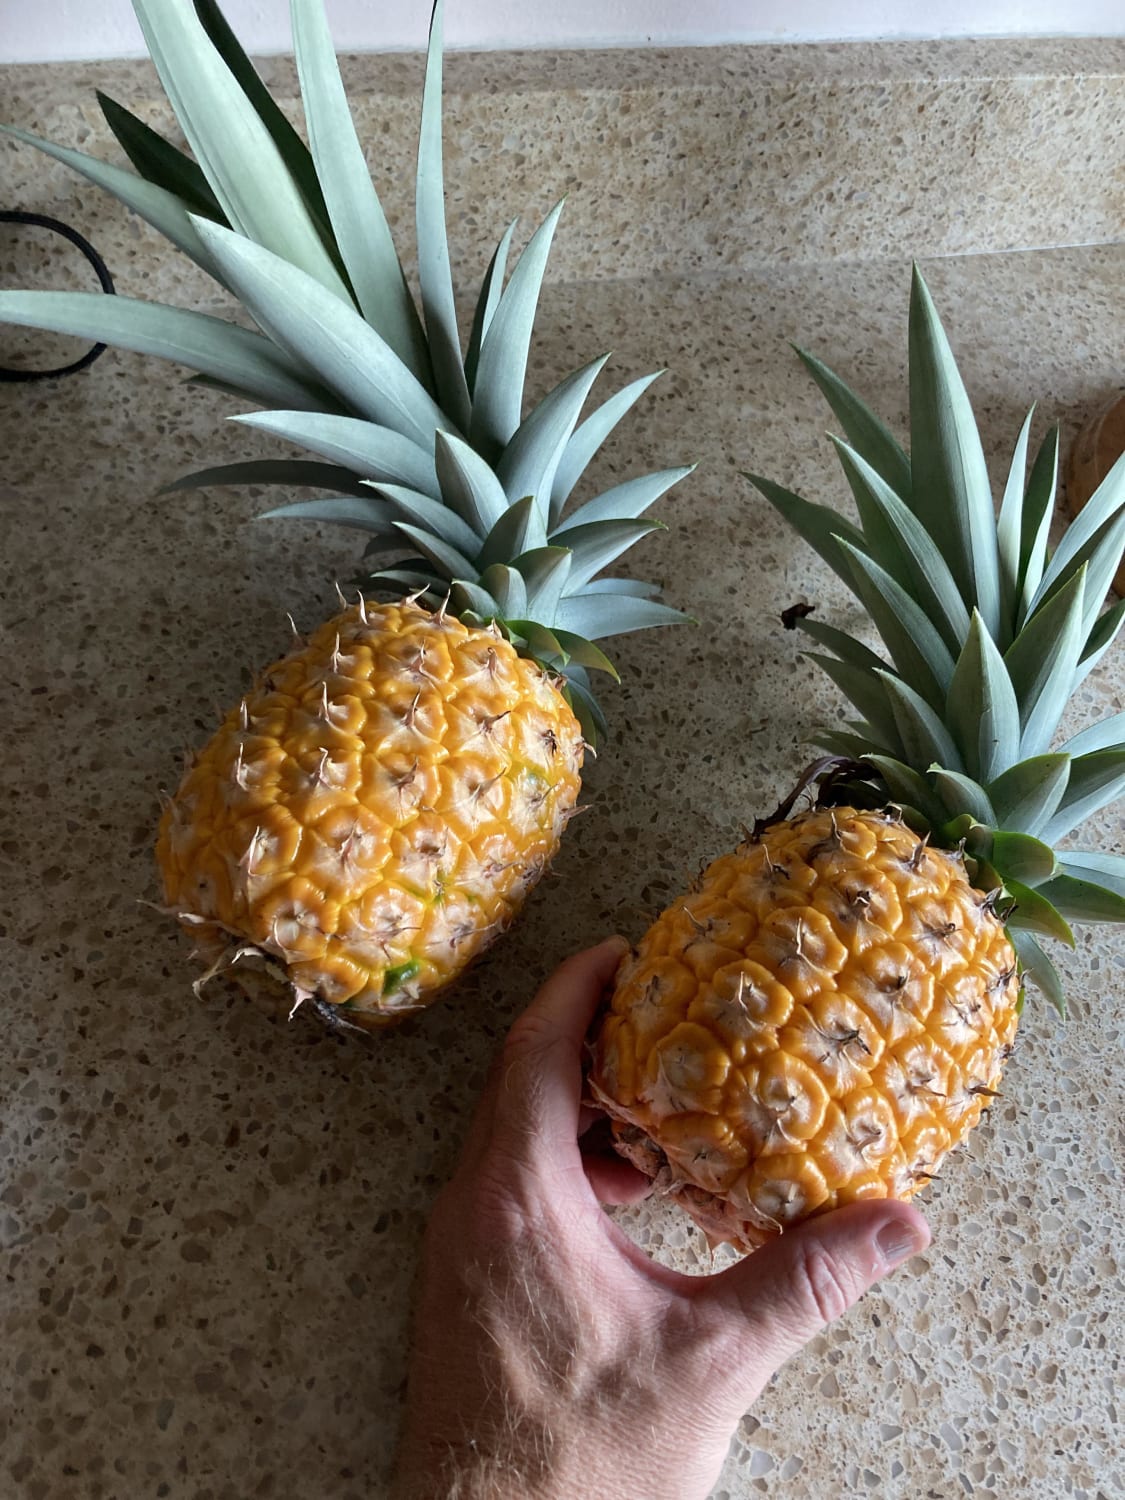 One benefit of Florida: fresh pineapples